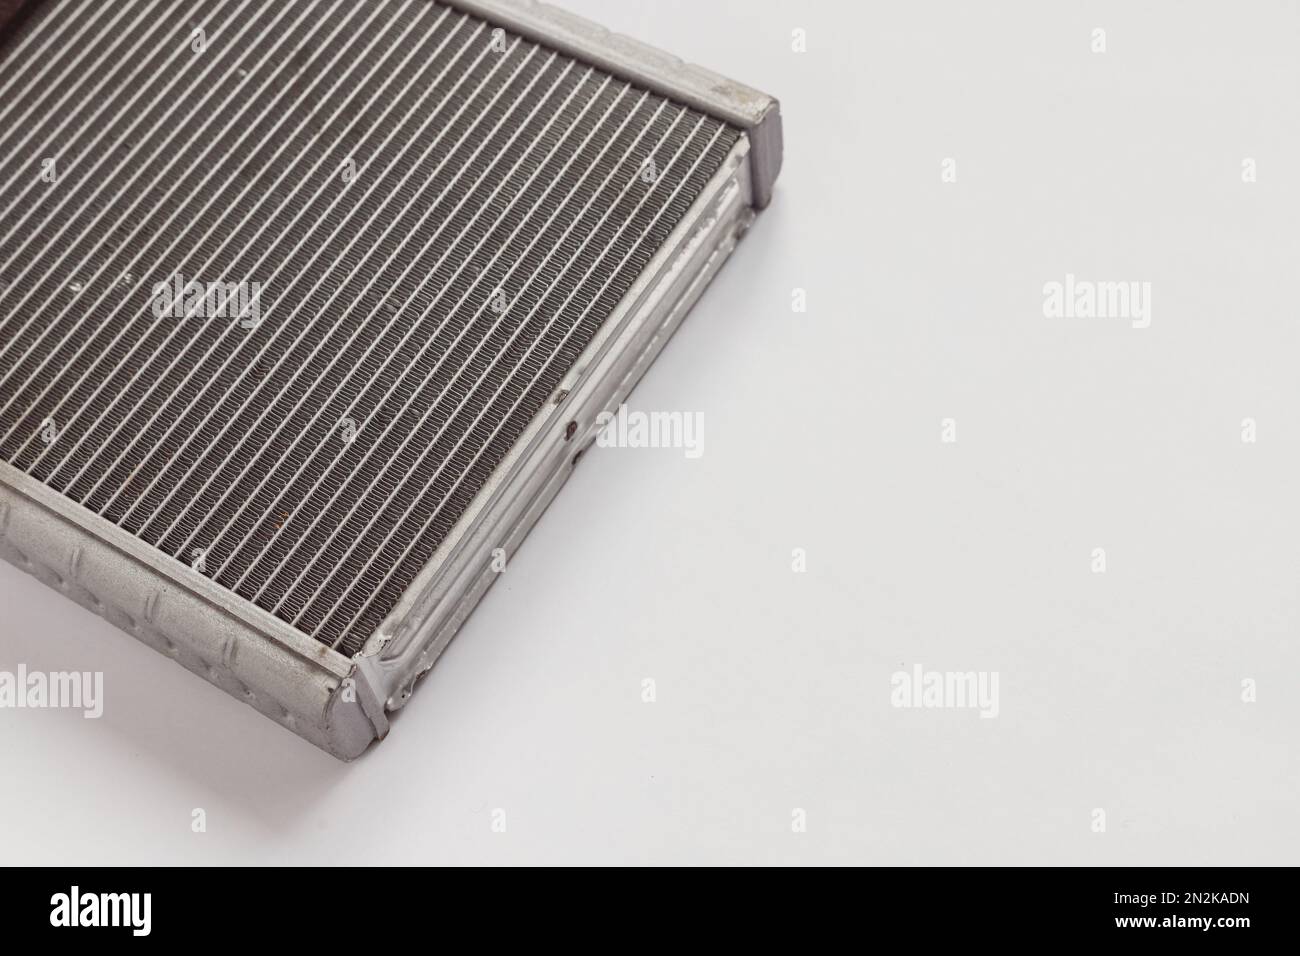 Car aluminum Heat Exchanger. Air Heater radiator for vehicle on white background. Industrial parts. Stock Photo